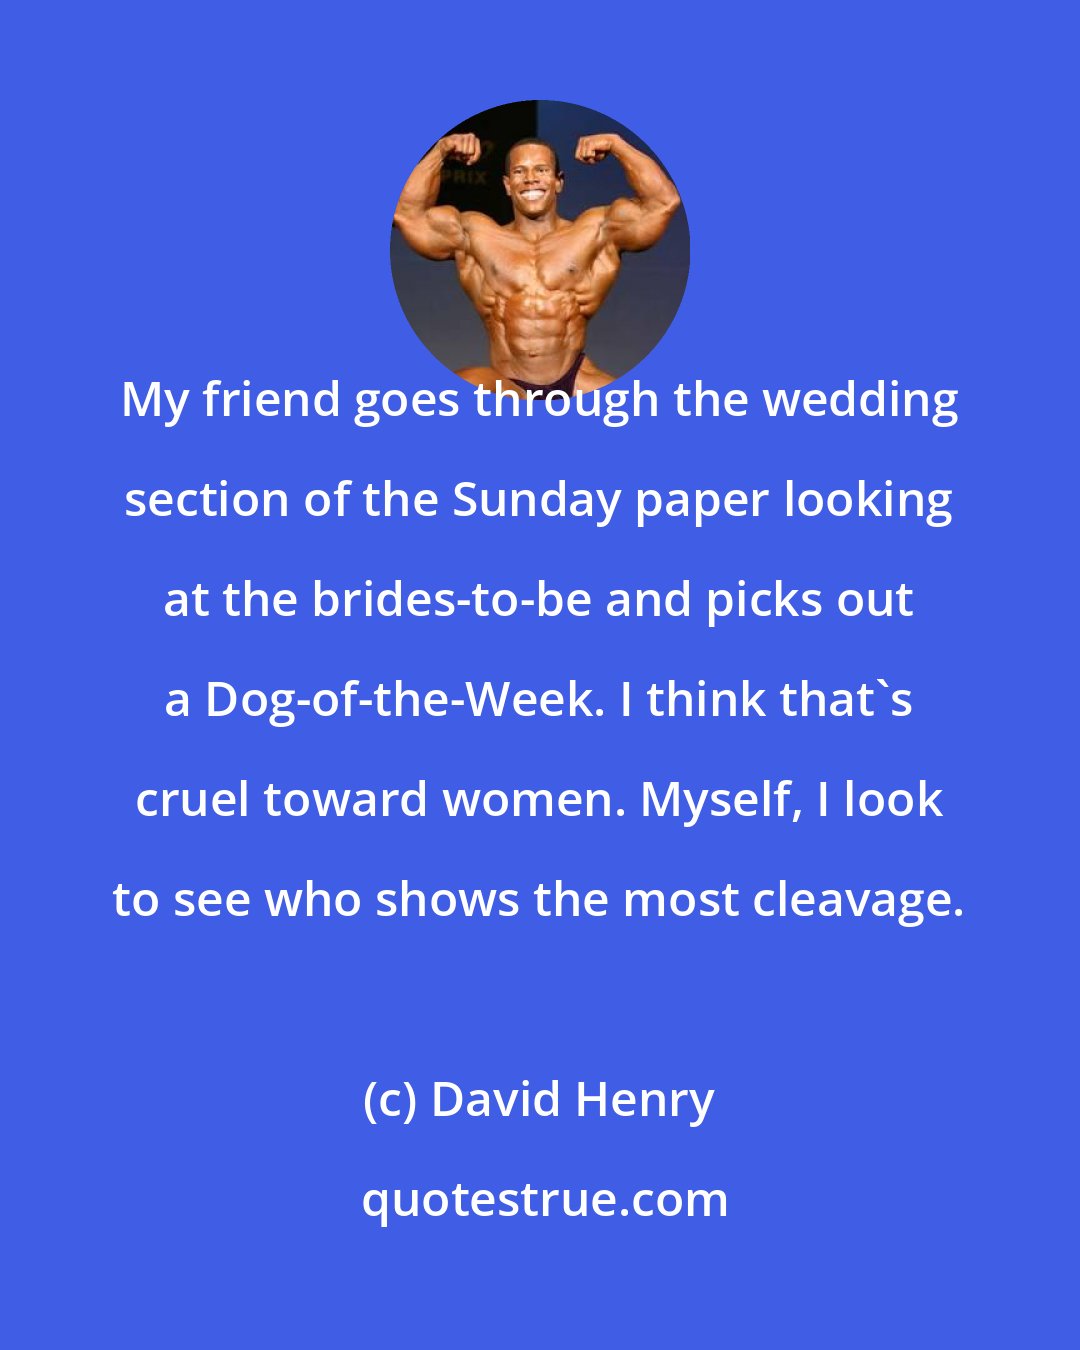 David Henry: My friend goes through the wedding section of the Sunday paper looking at the brides-to-be and picks out a Dog-of-the-Week. I think that's cruel toward women. Myself, I look to see who shows the most cleavage.